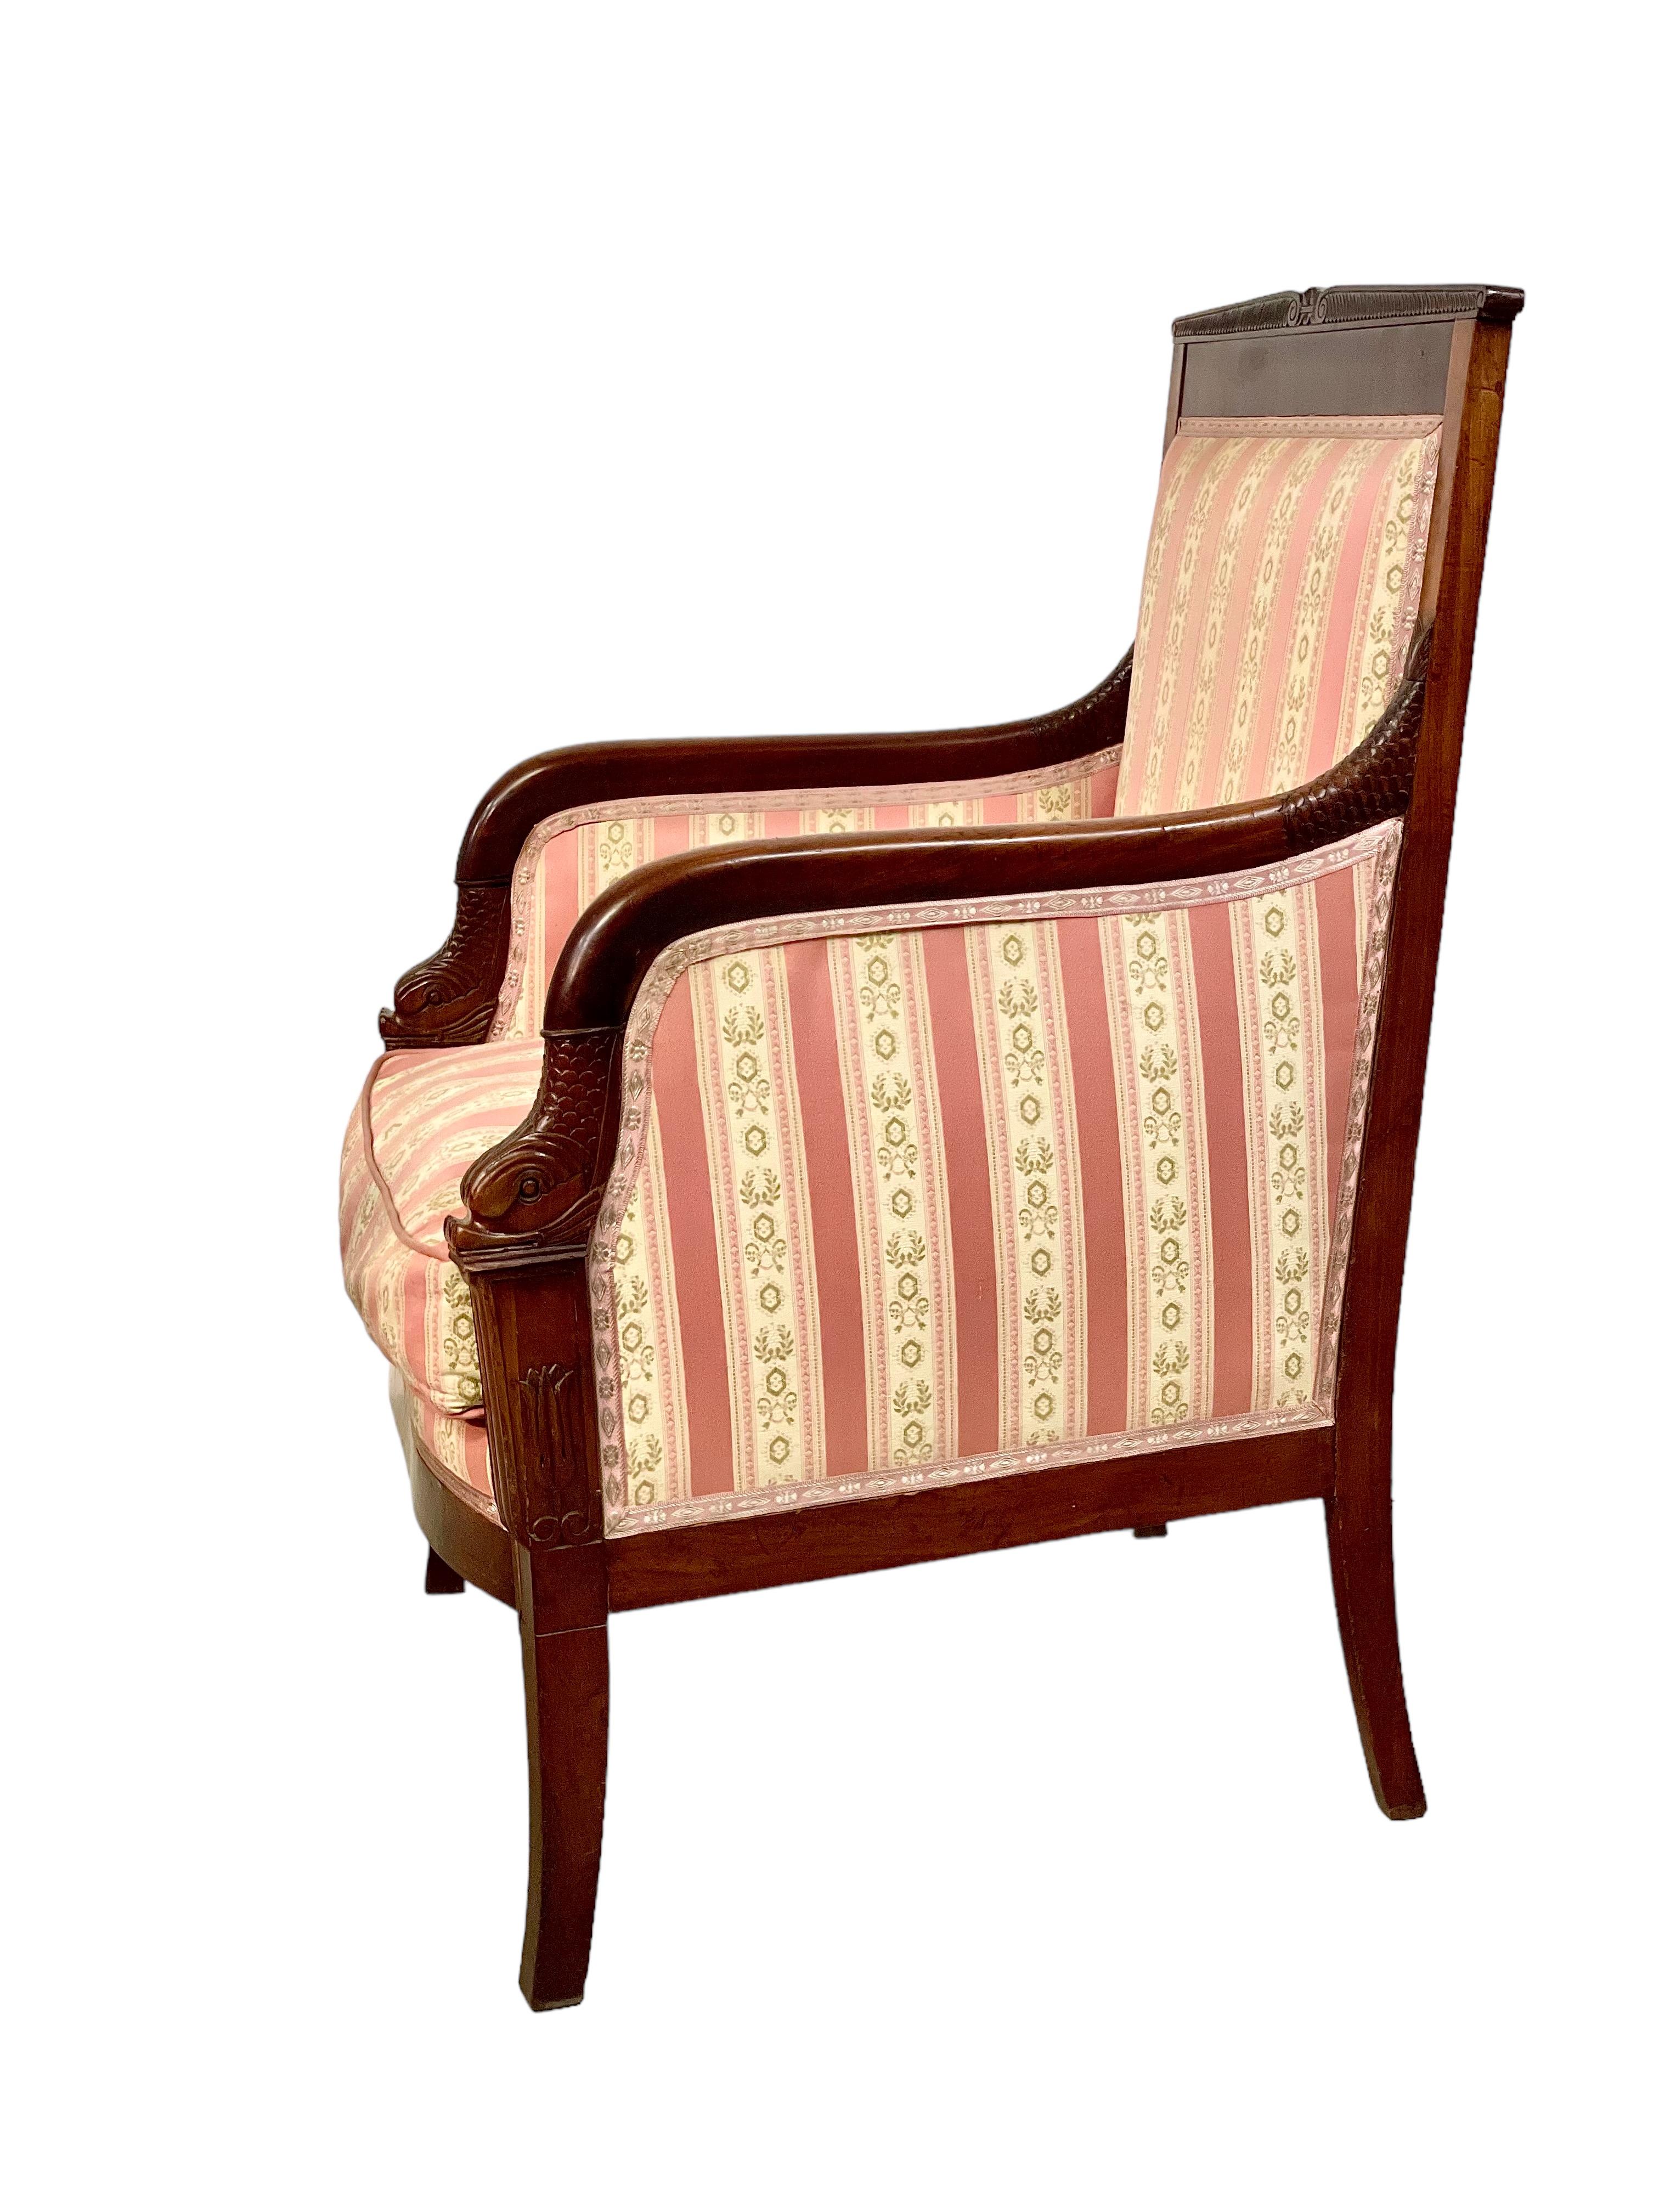 An impressive 'Bergère' armchair in solid wood, dating from the First Empire period (early 19th century) and generously upholstered throughout in alternating stripes of deep pink and cream. This comfortable and stylish chair features a wealth of